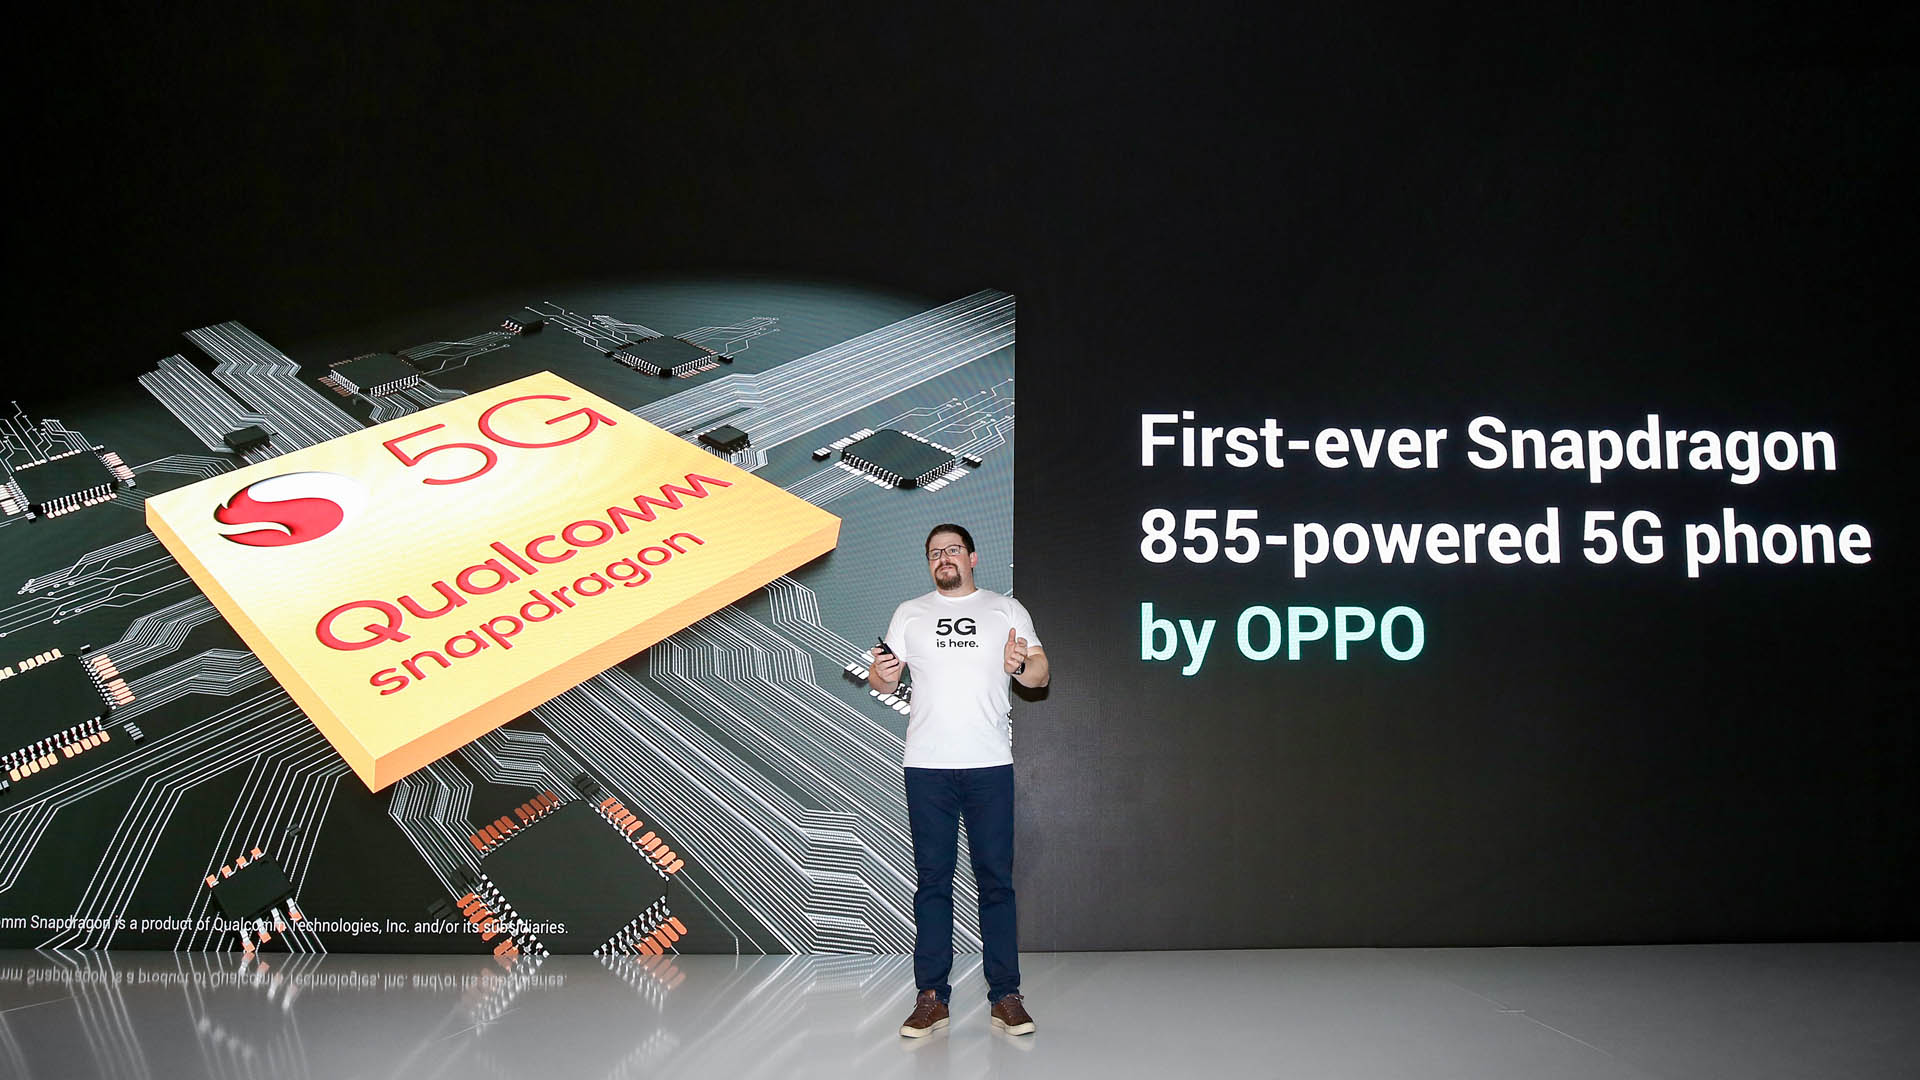 OPPO MWC